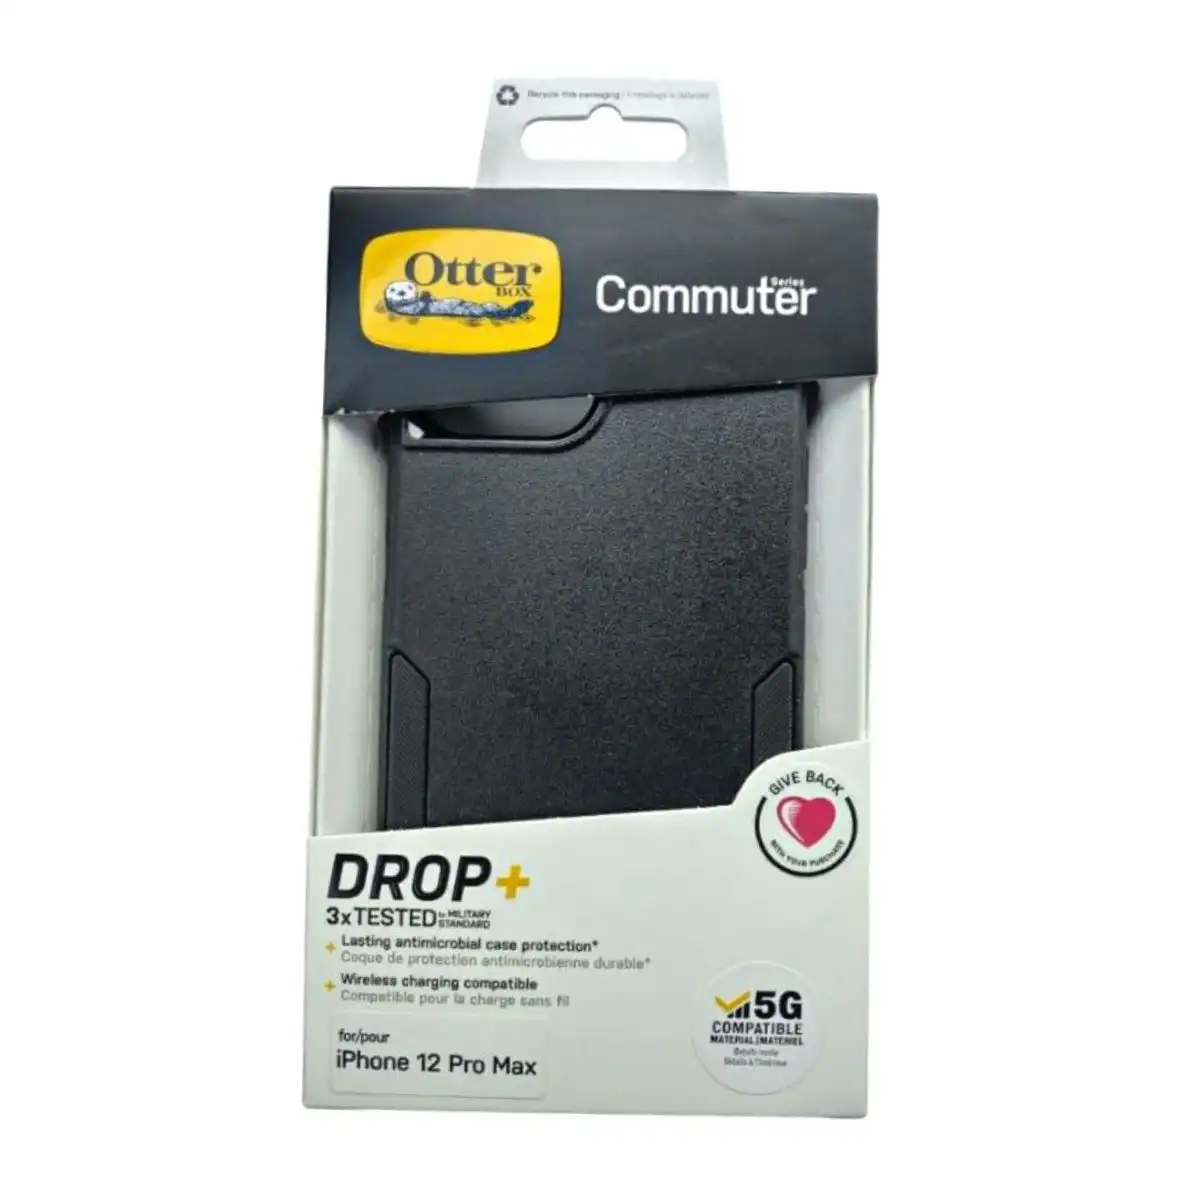 Otterbox Commuter Case for iPhone 12 Pro Max - Black